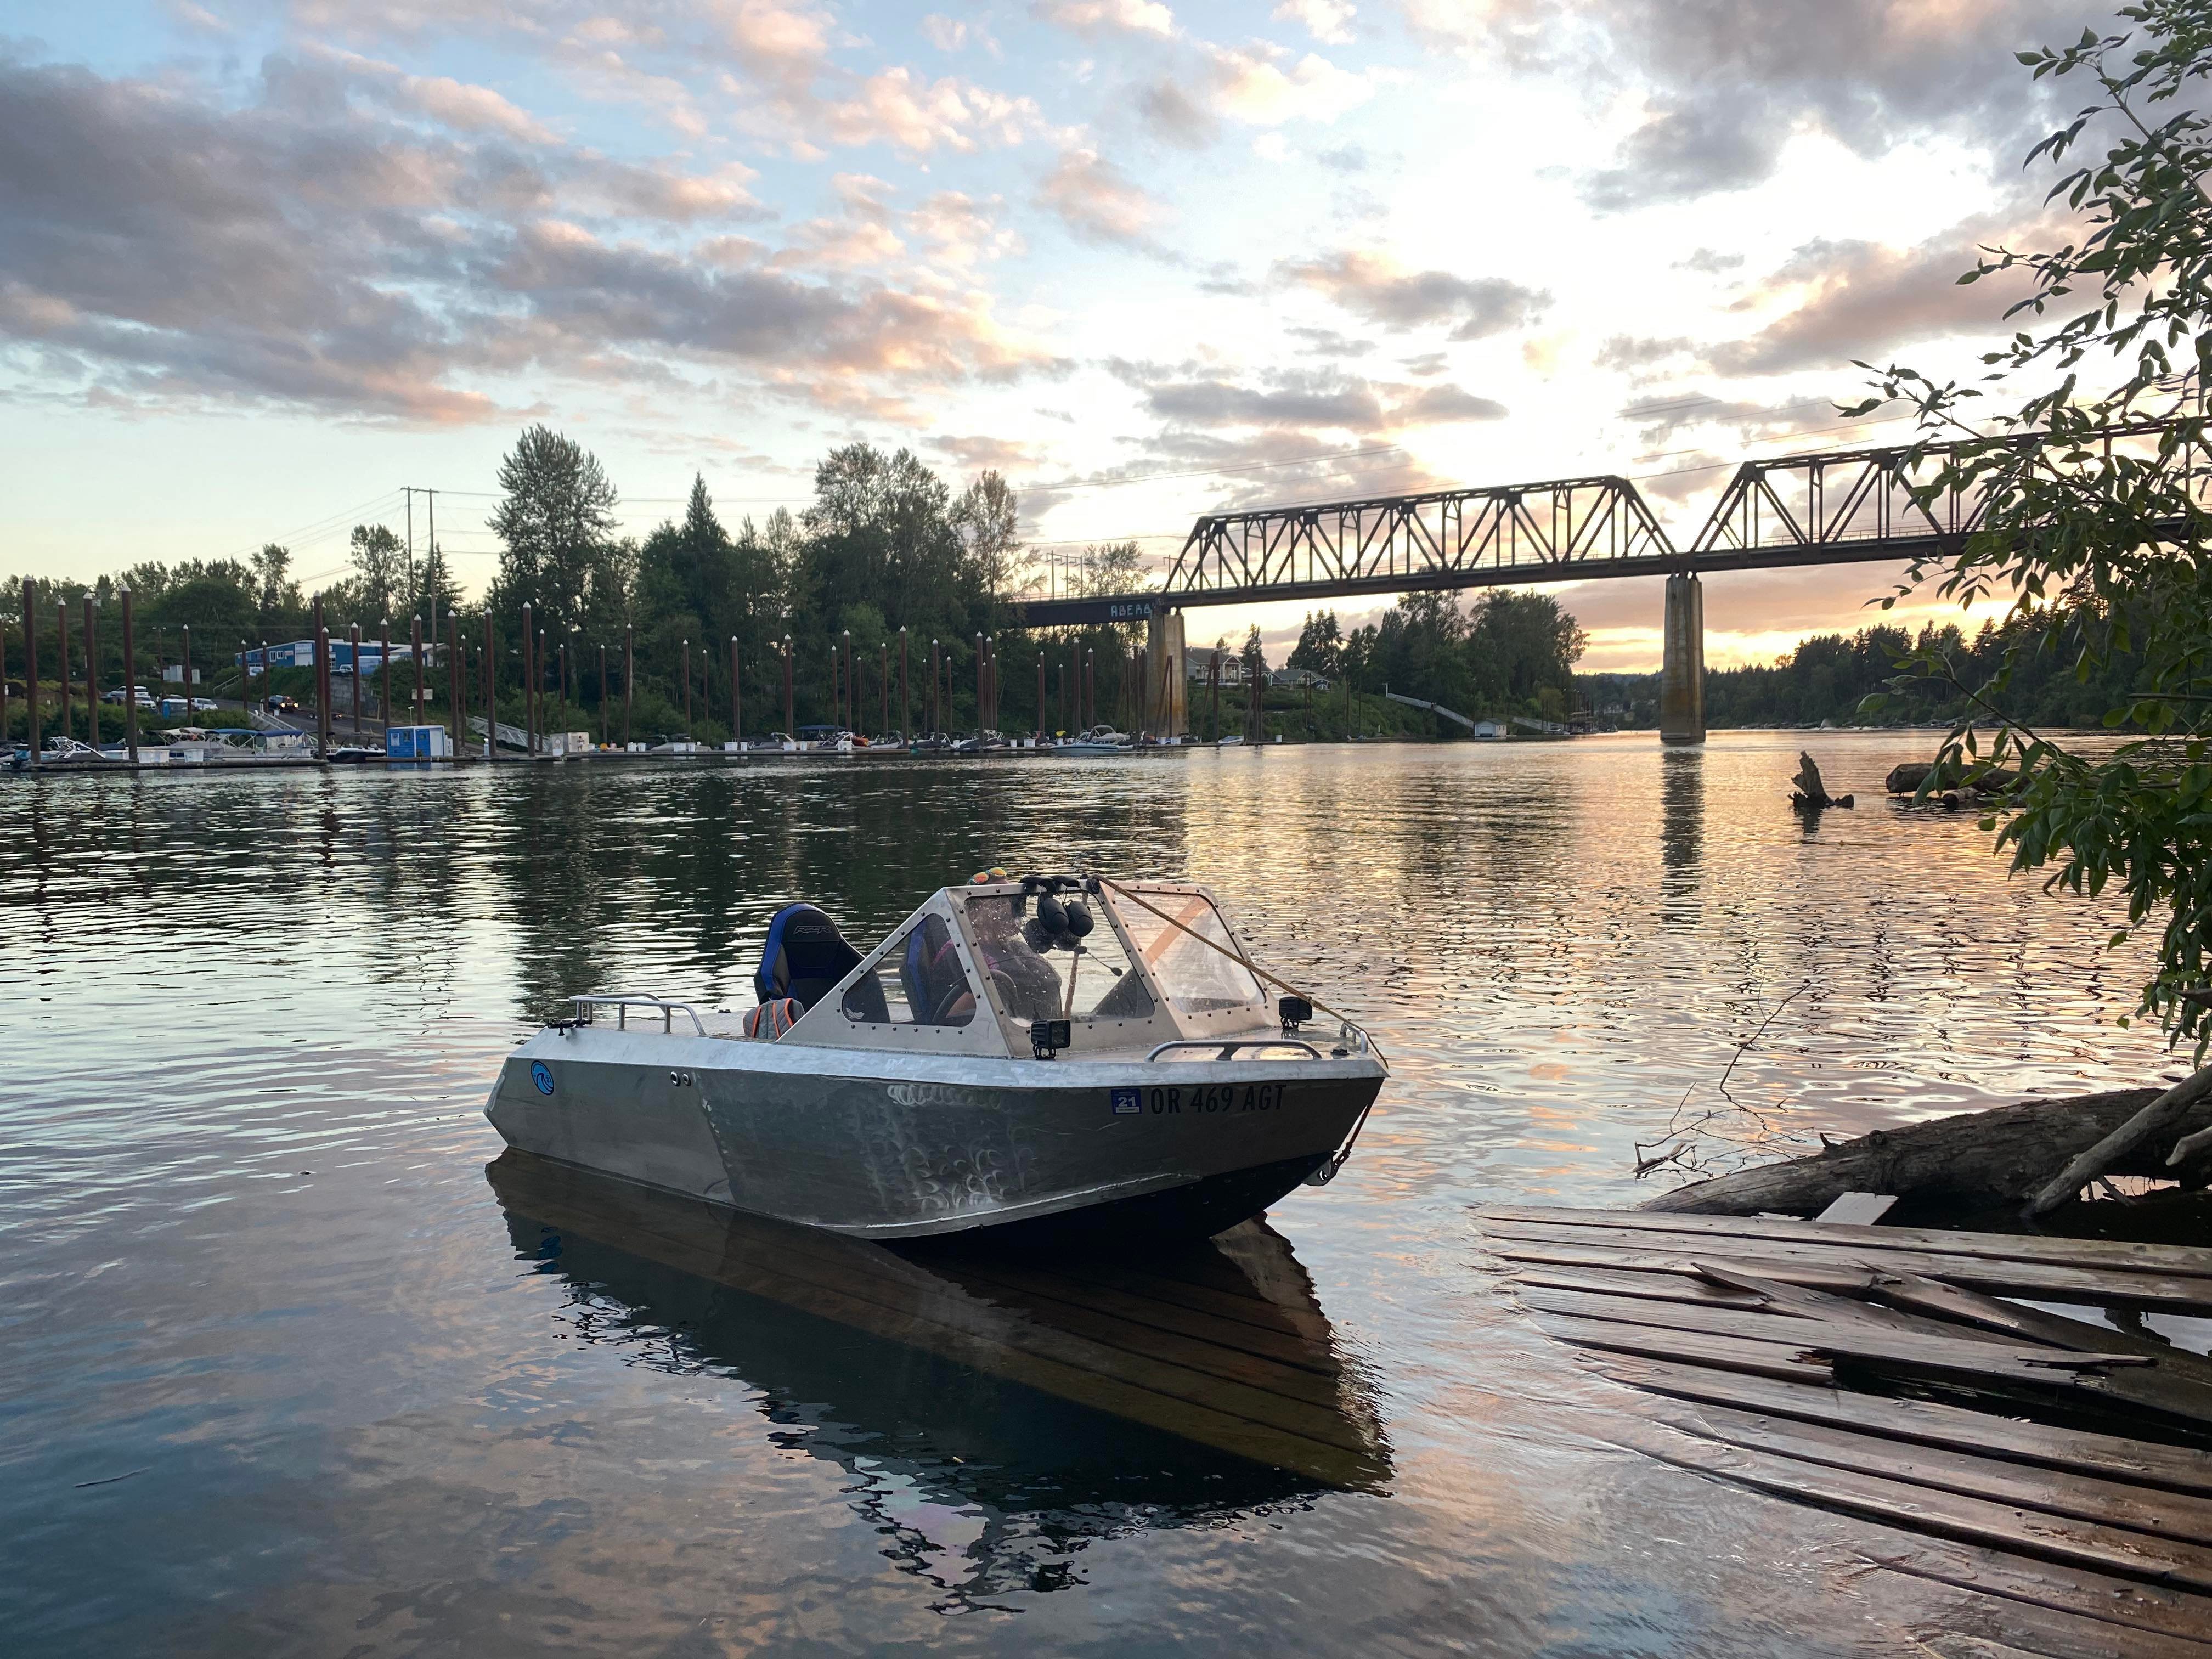 Help us Protect Motorized Access for Mini Jet Boats in Oregon’s Rivers